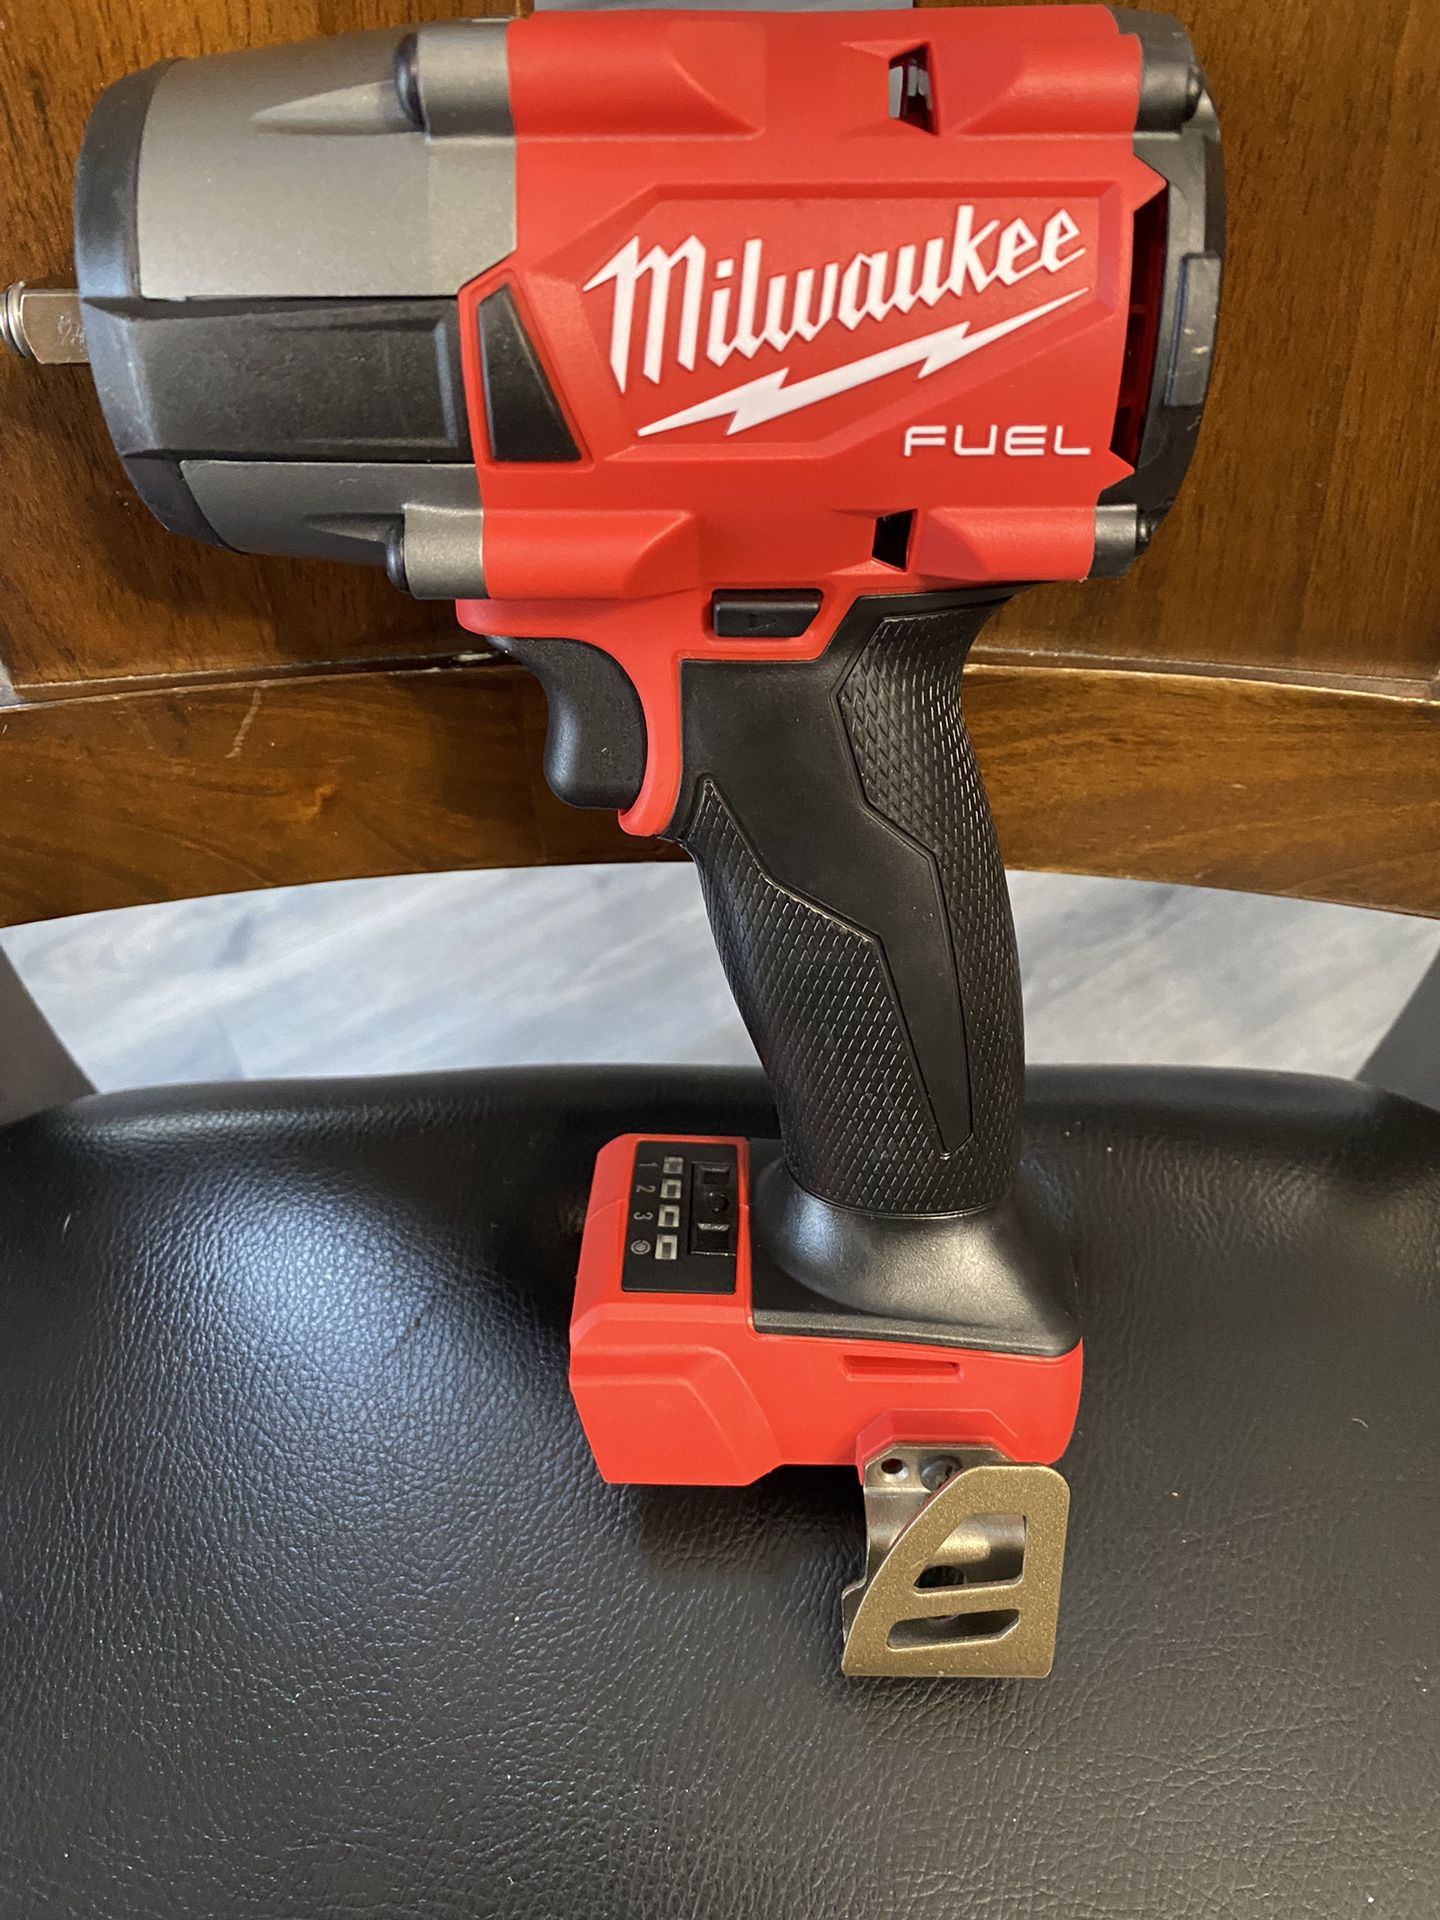 MILWAUKEE  FUEL  M18 IMPACT 3/8 NEW  BRUSHLESS IN BOX  $160 Firm No Offers 